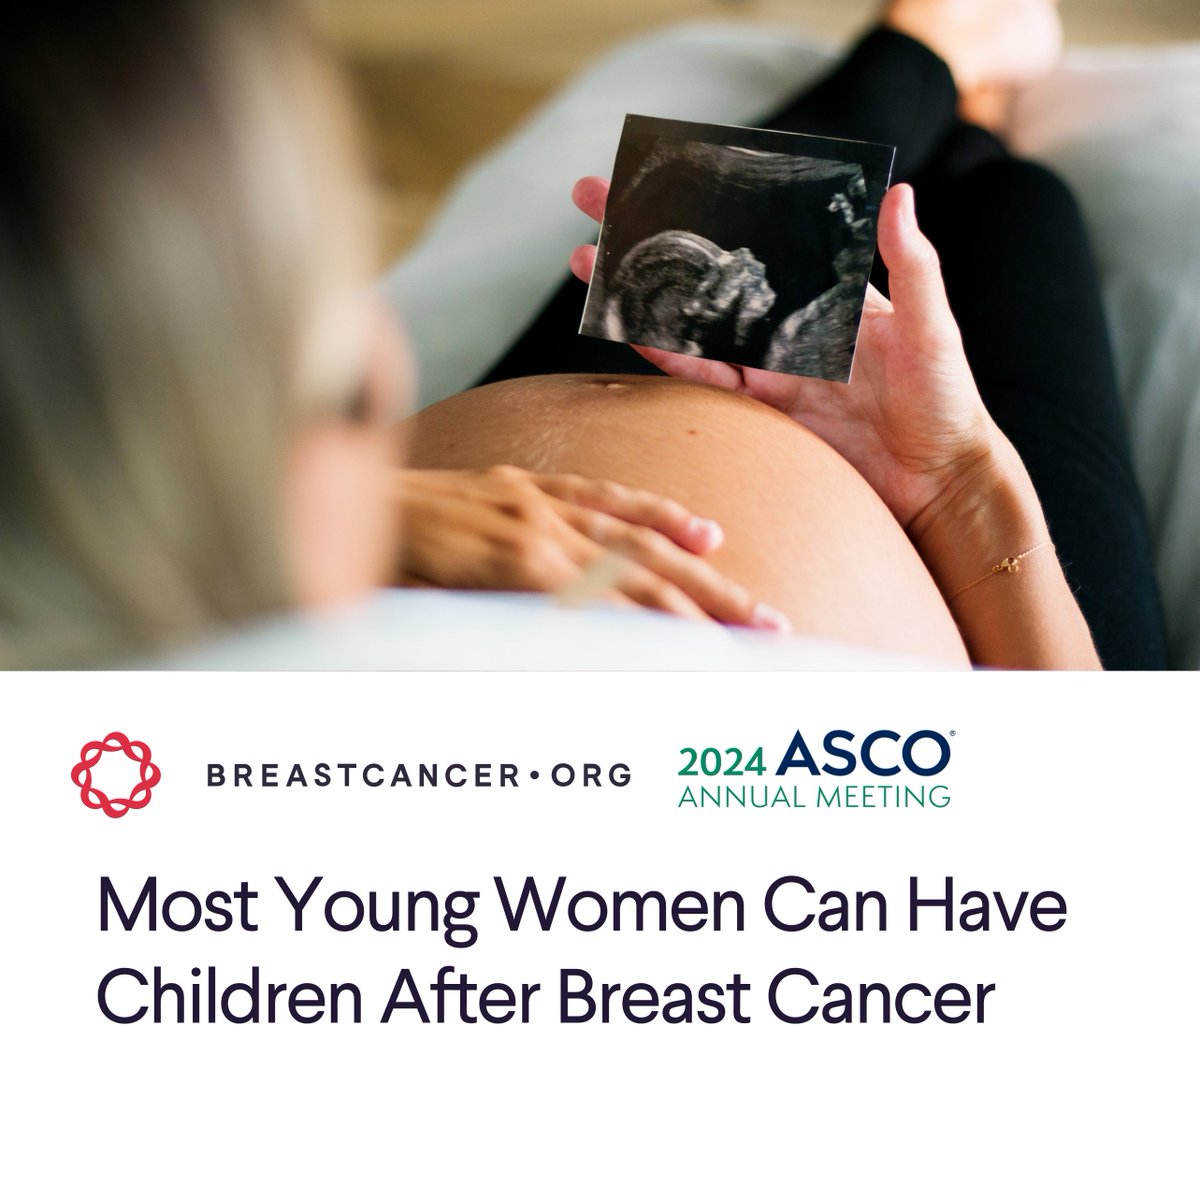 Most women who attempted to conceive following treatment for stage I to Ill breast cancer were able to become pregnant at least once and have a live birth, a new study presented at #ASCO24 shows. bit.ly/452v6NL 

#breastcancer #breastcancerresearch #breastcancersurvivor